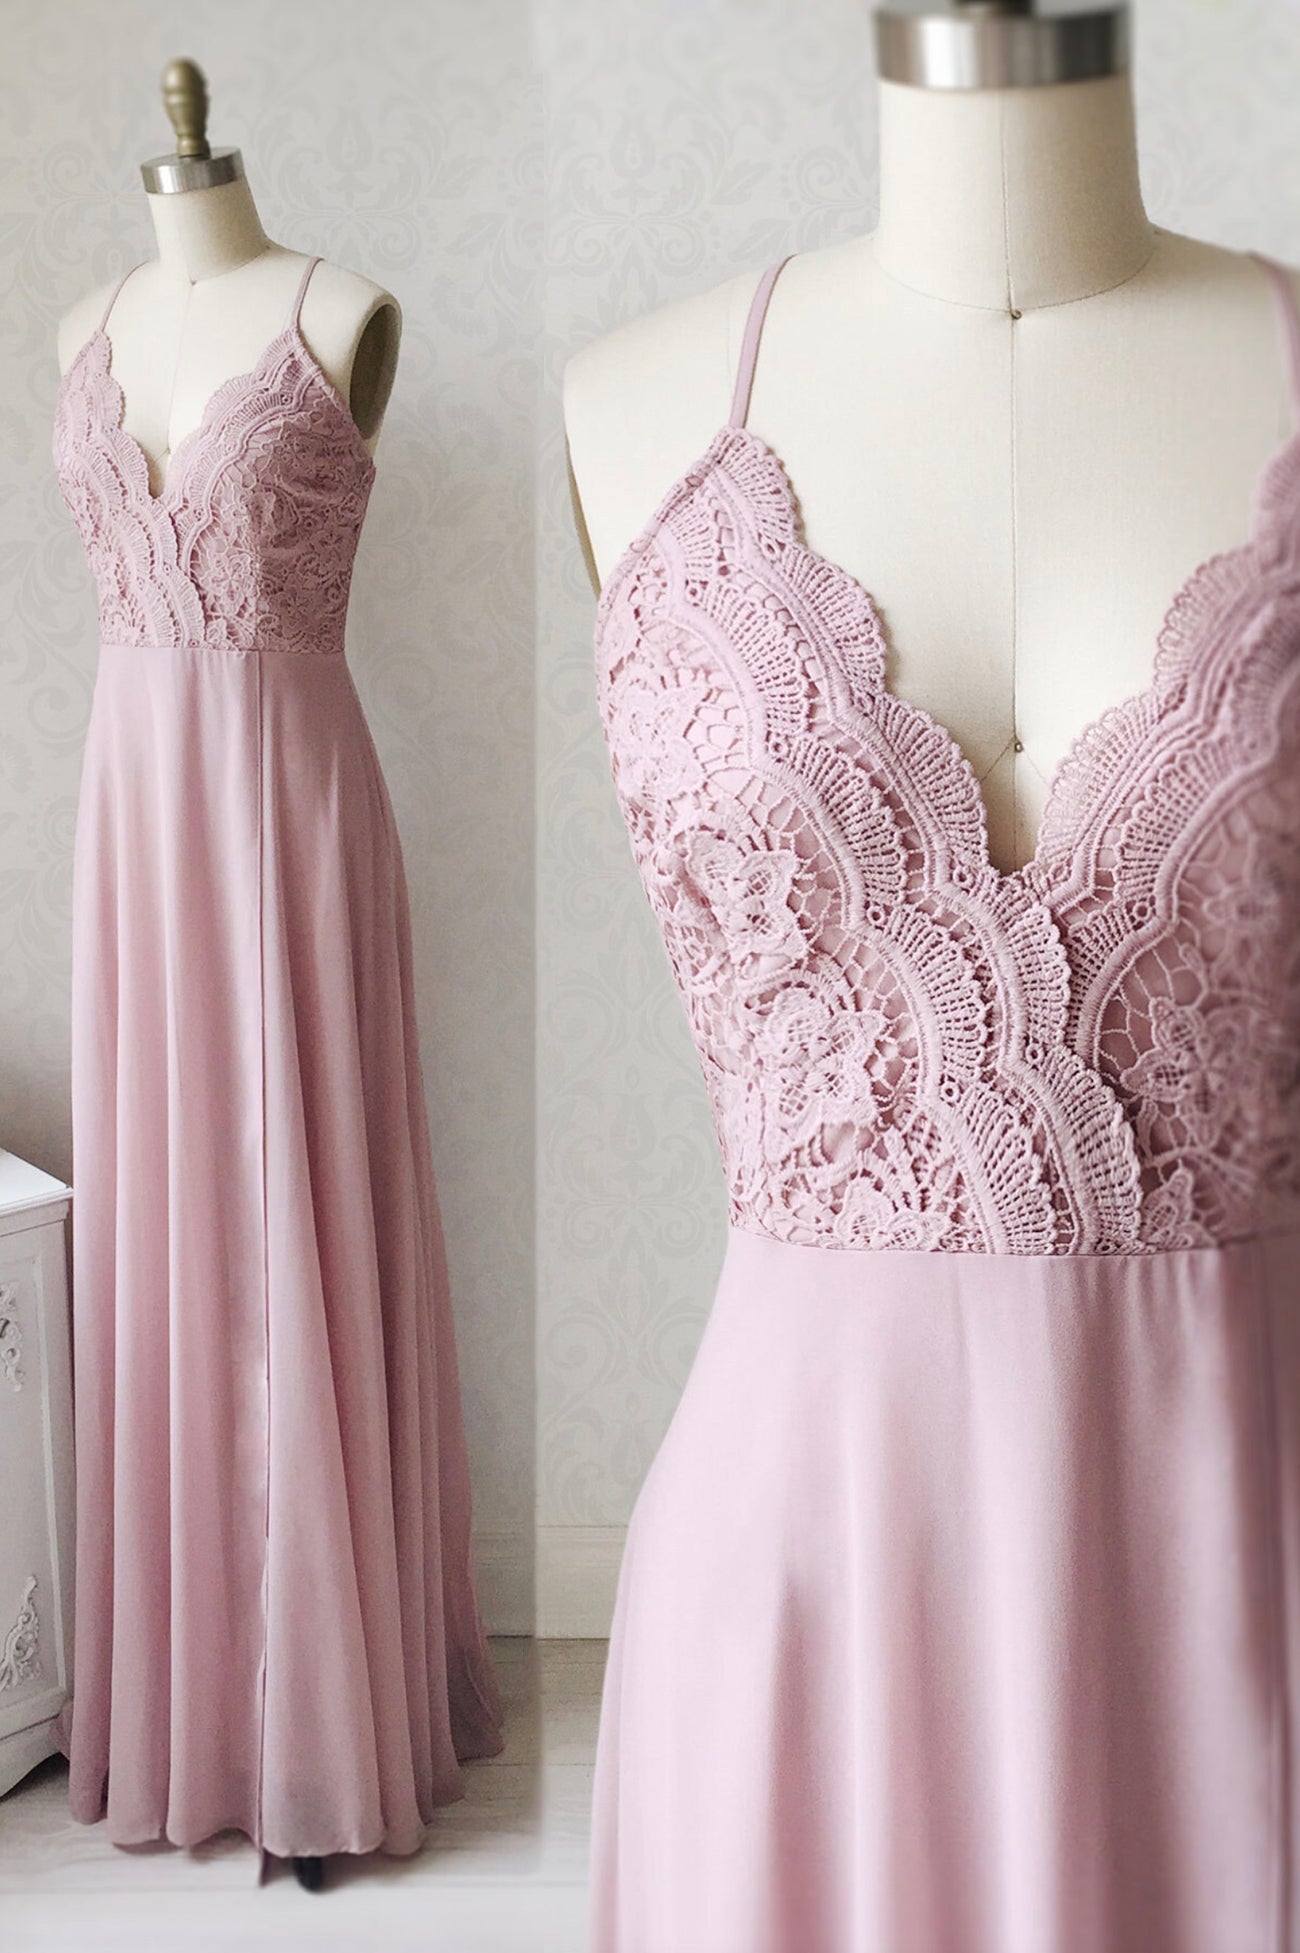 Homecoming Dresses Red, Pink Chiffon Lace Long A-Line Prom Dress, Pink V-Neck Evening Dress